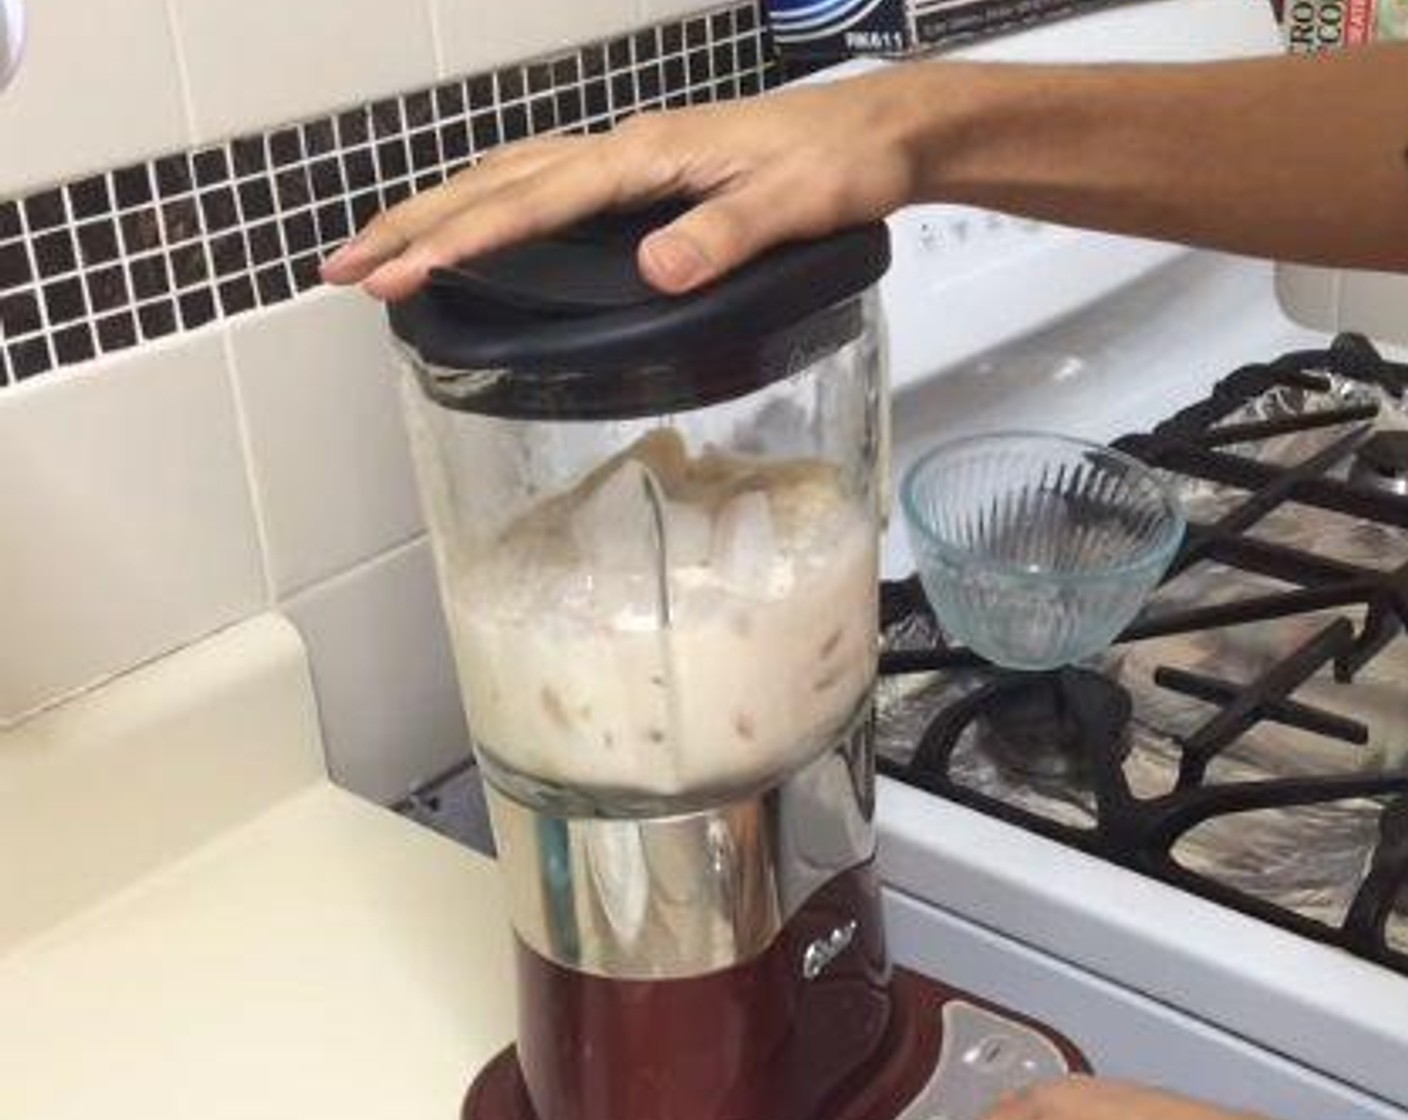 step 1 Into a blender, add and mix the Bananas (3), Evaporated Milk (12 fl oz), Milk (1/4 cup), Granulated Sugar (1/4 cup), Vanilla Extract (1 tsp), Ground Nutmeg (1/8 tsp), and Ice (to taste).